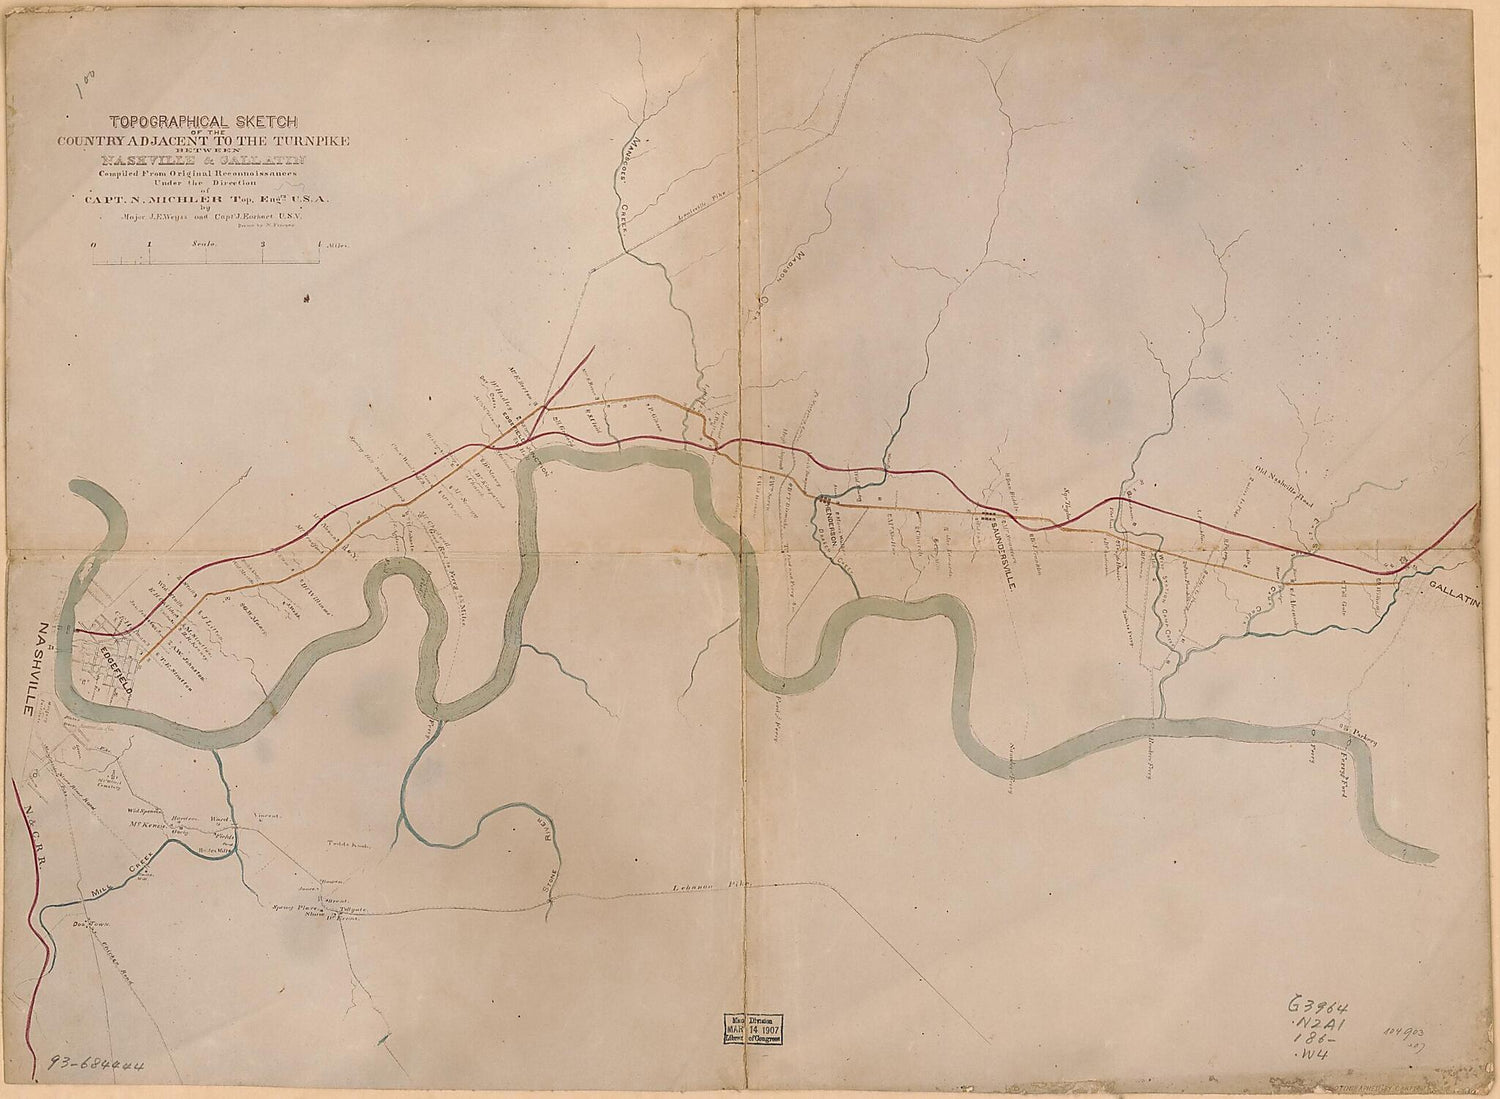 This old map of Topographical Sketch of the Country Adjacent to the Turnpike Between Nashville &amp; Gallatin from 1860 was created by J. E. Weyss in 1860